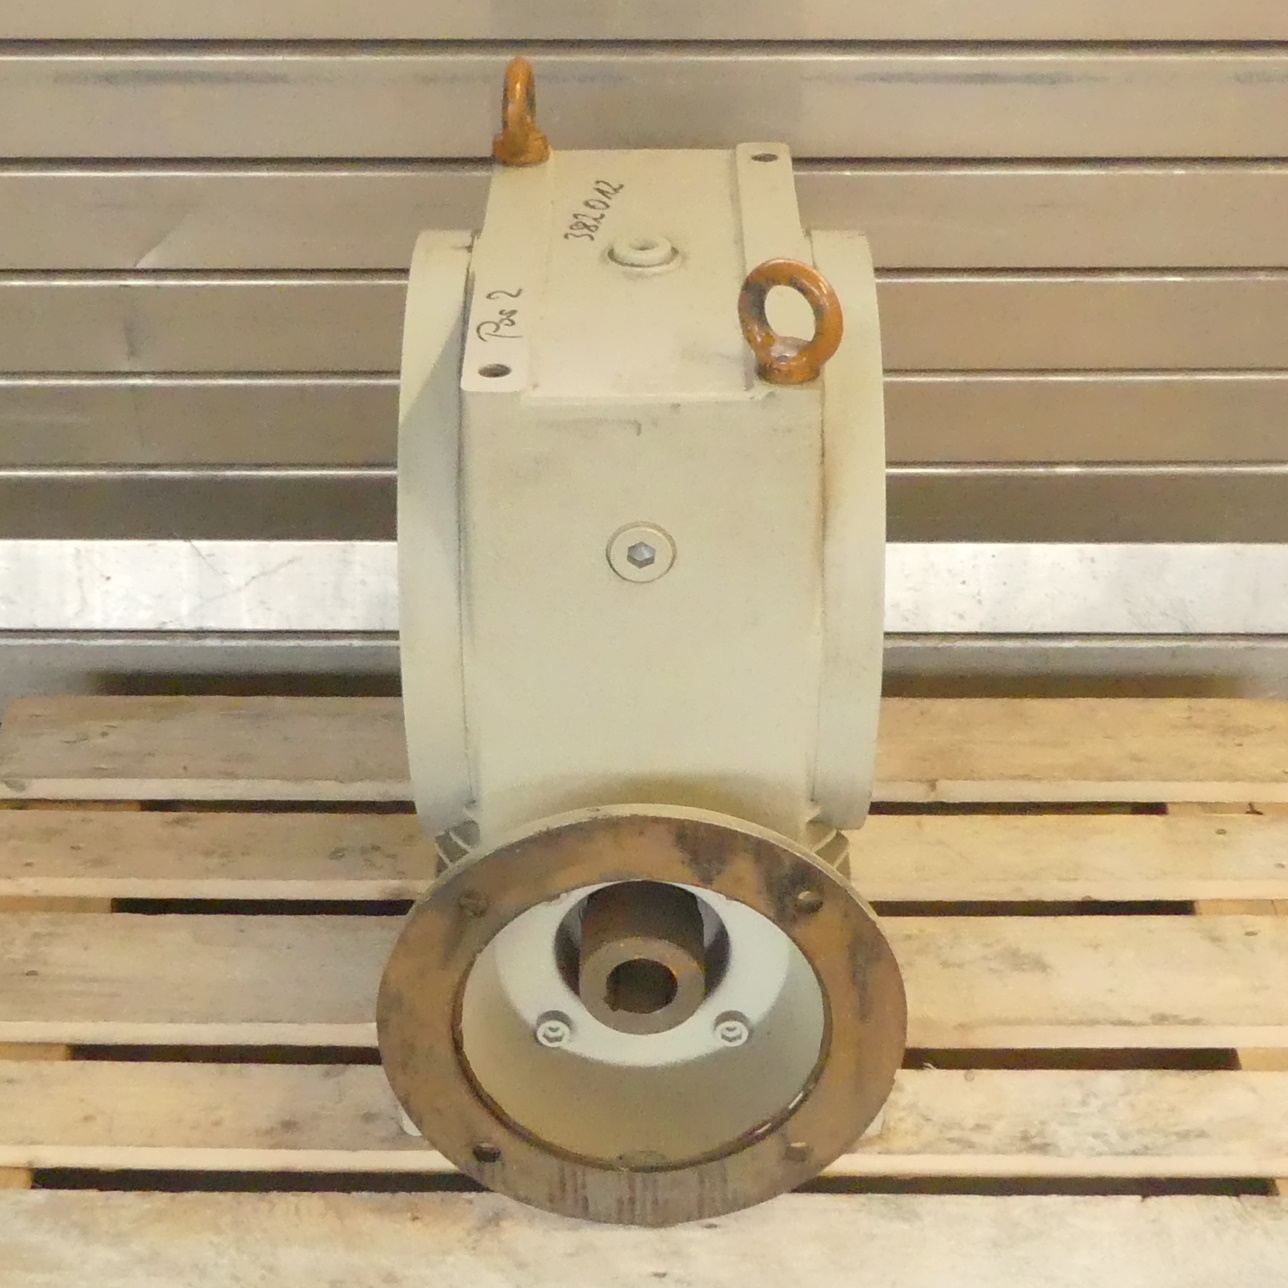 Worm Drive Gearbox With Motor, ZAE Product Range